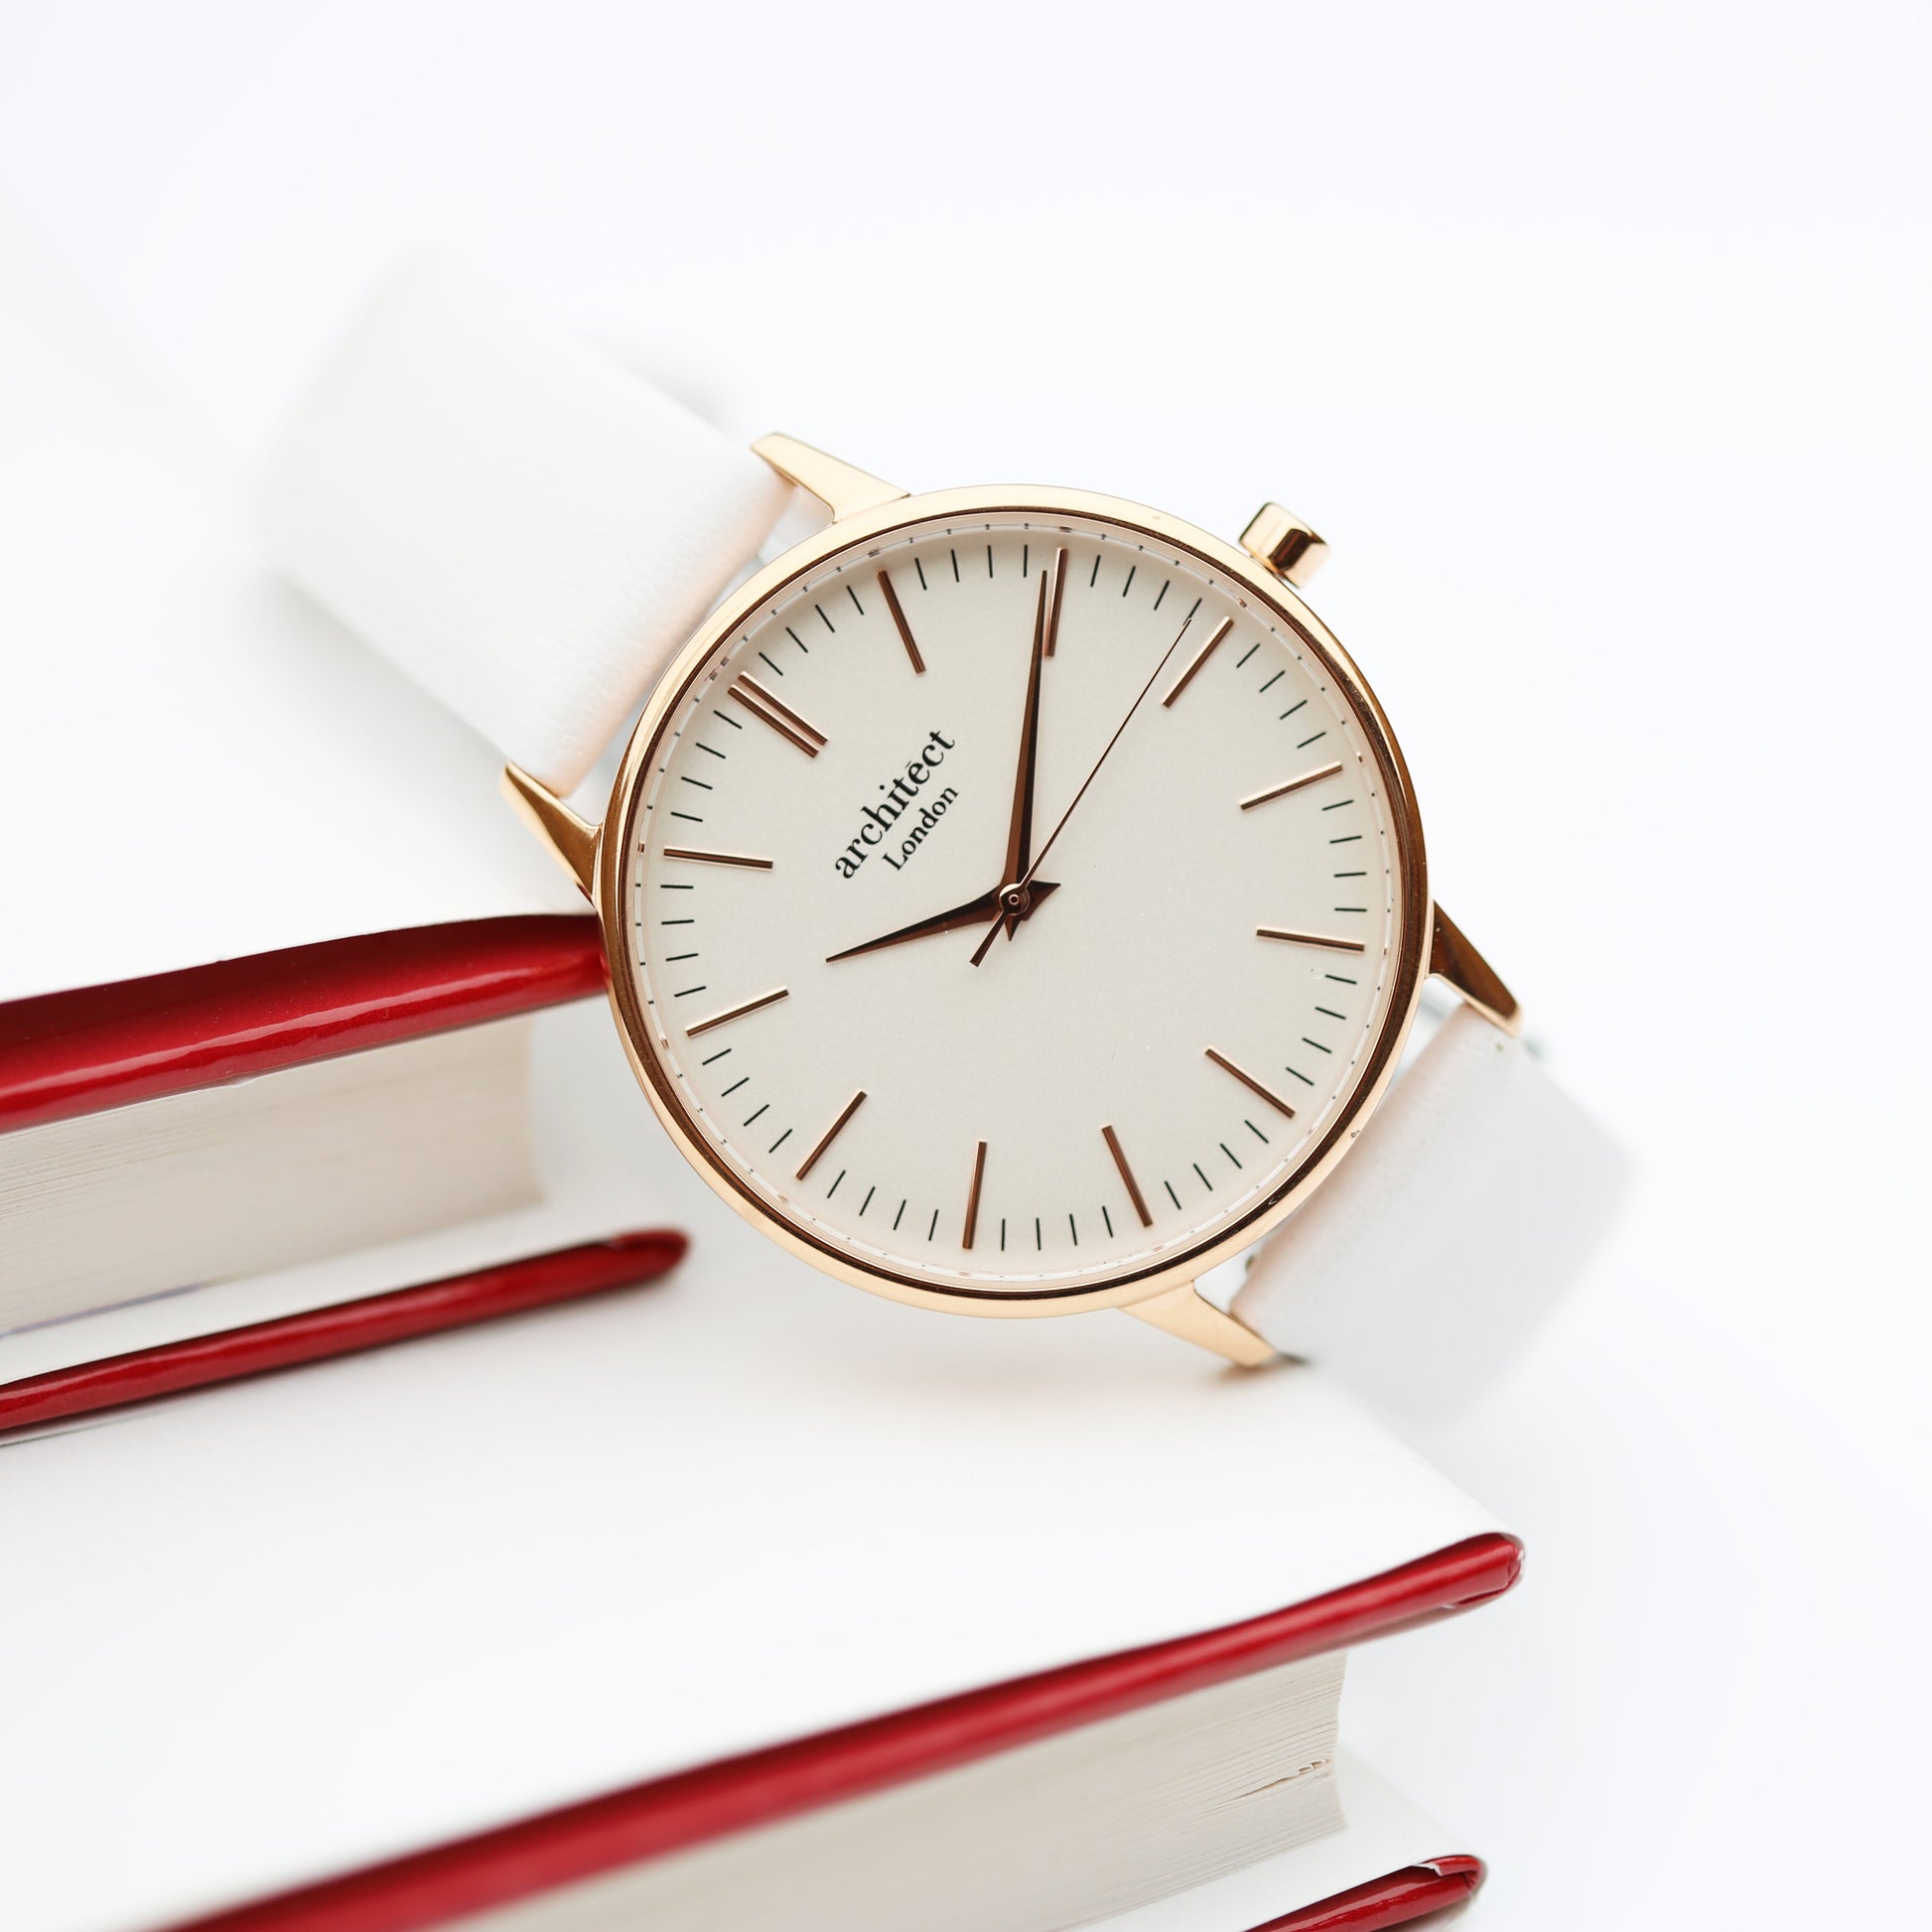 Personalized Ladies' Watches - Ladies Handwriting Engraved Watch in White Strap 